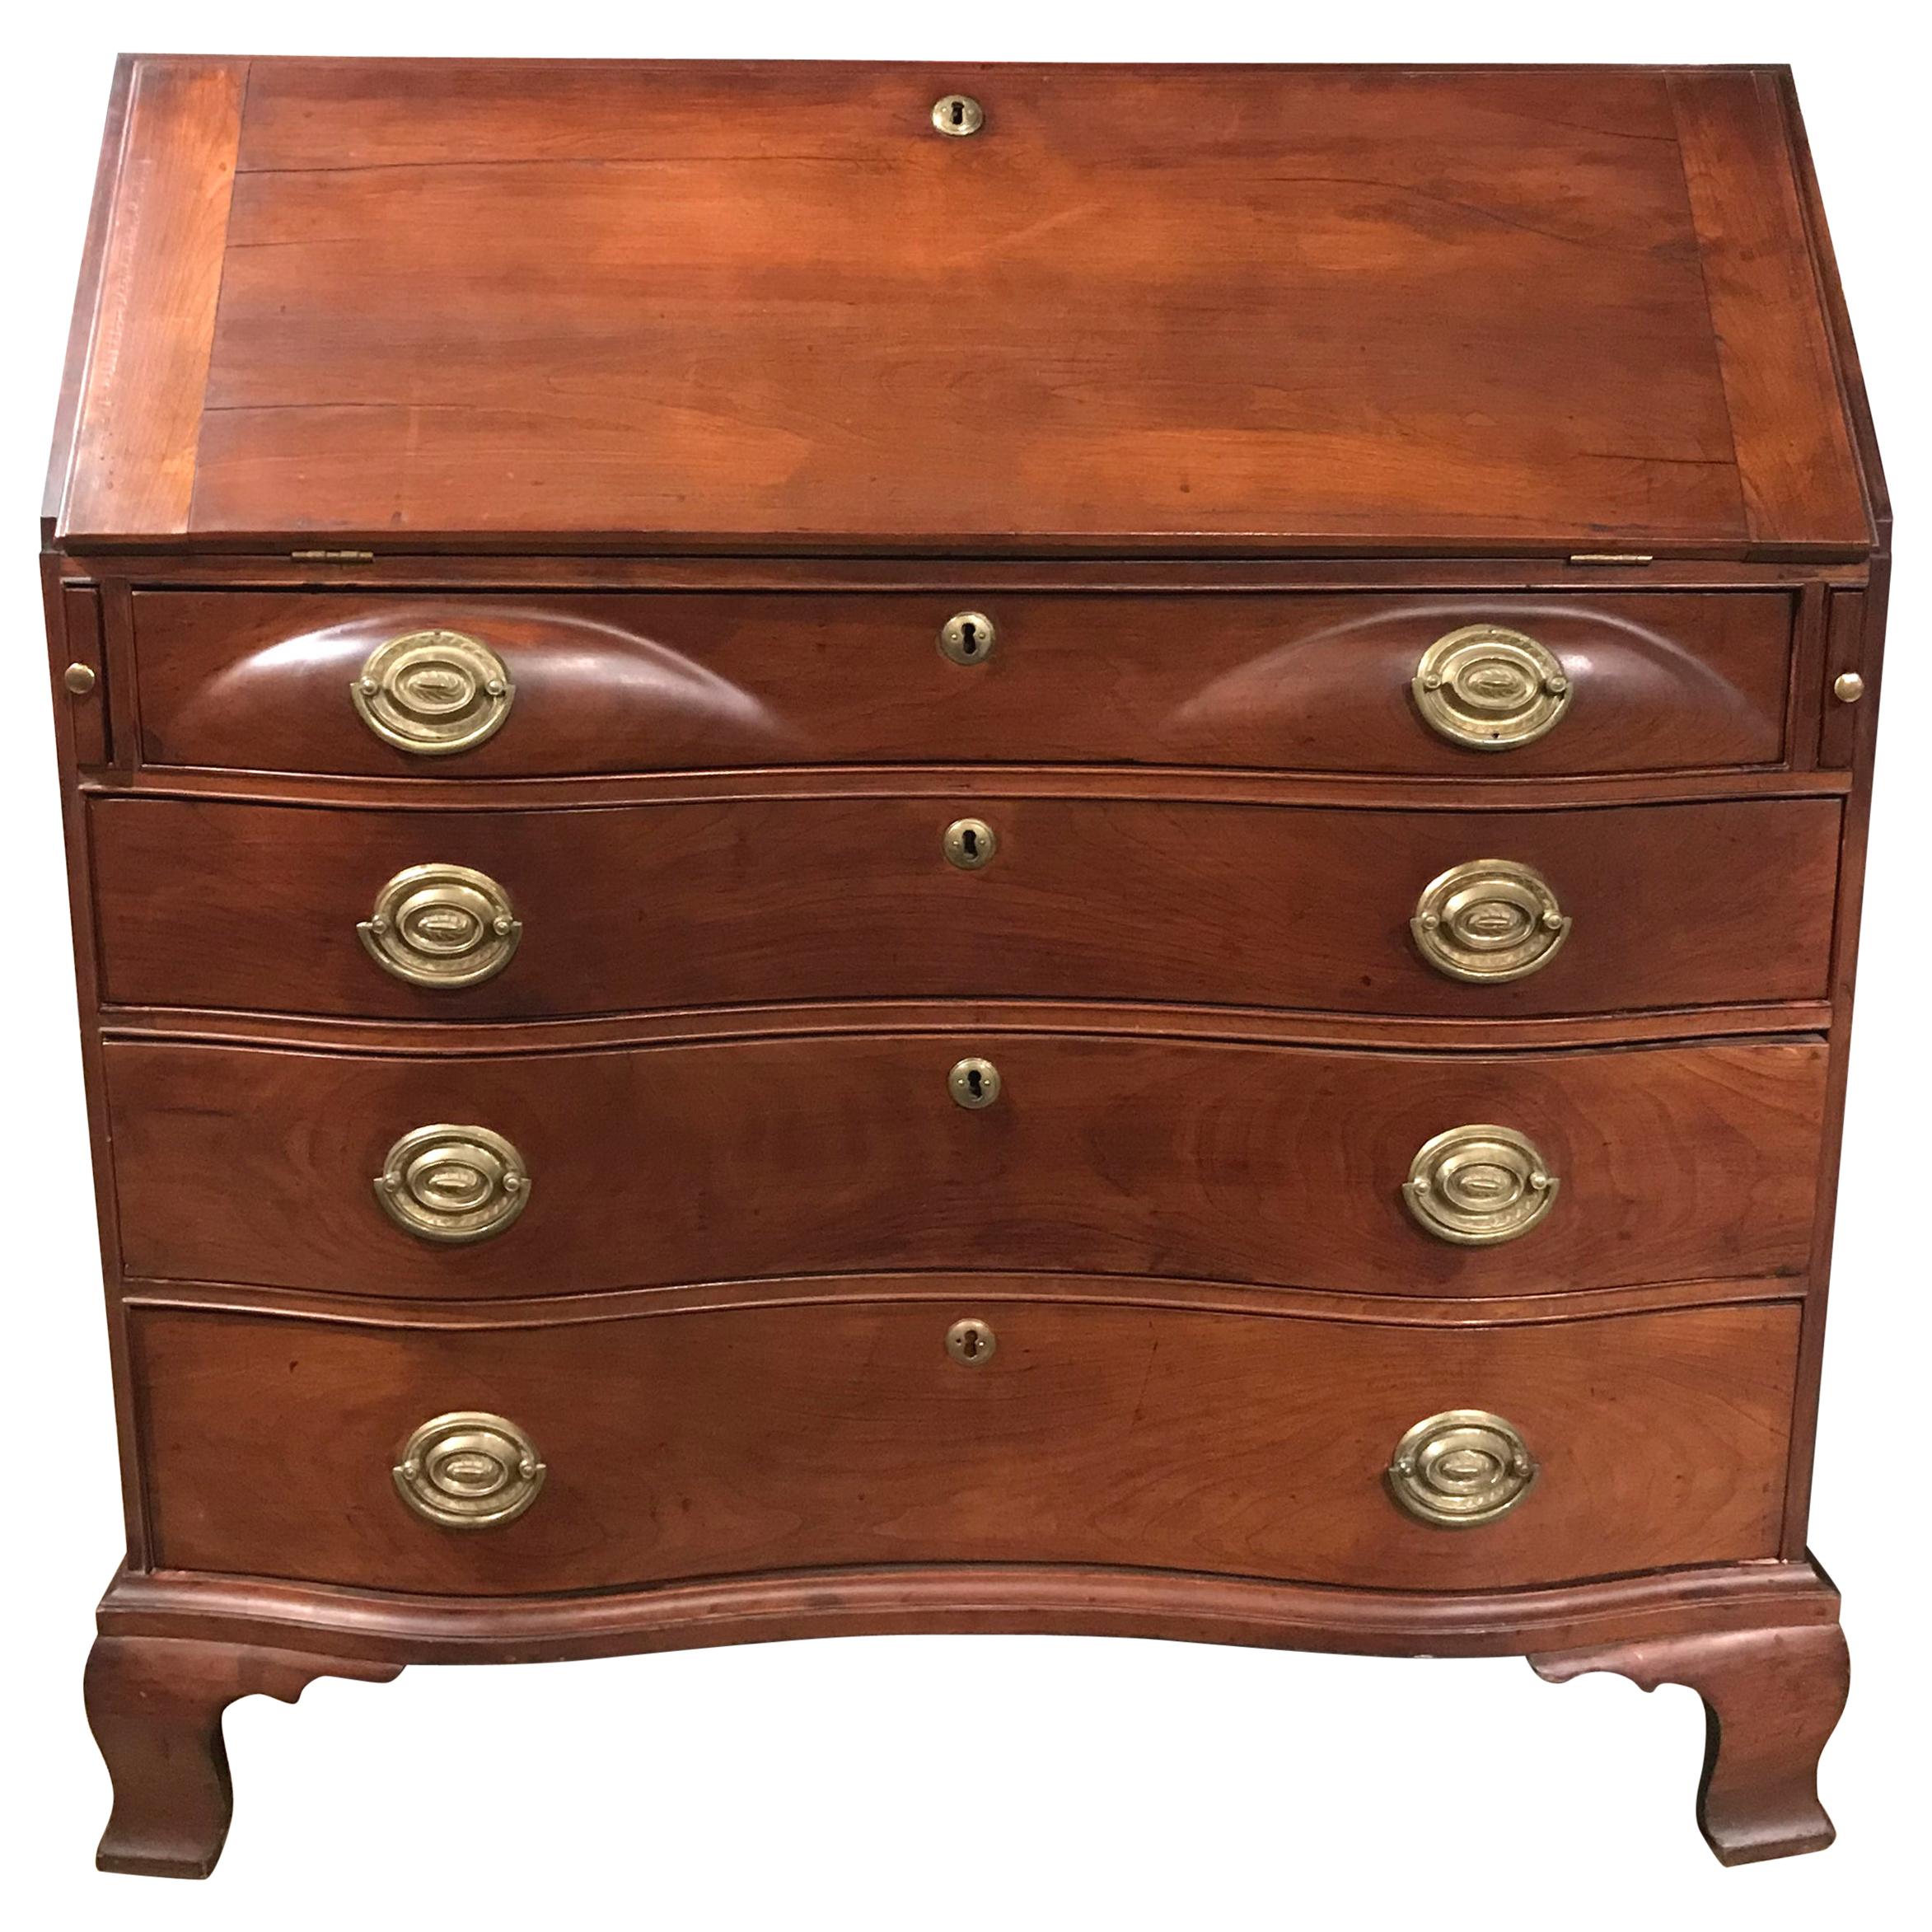 New England Chippendale Cherry Oxbow Slant Front Desk, circa 1780-1800